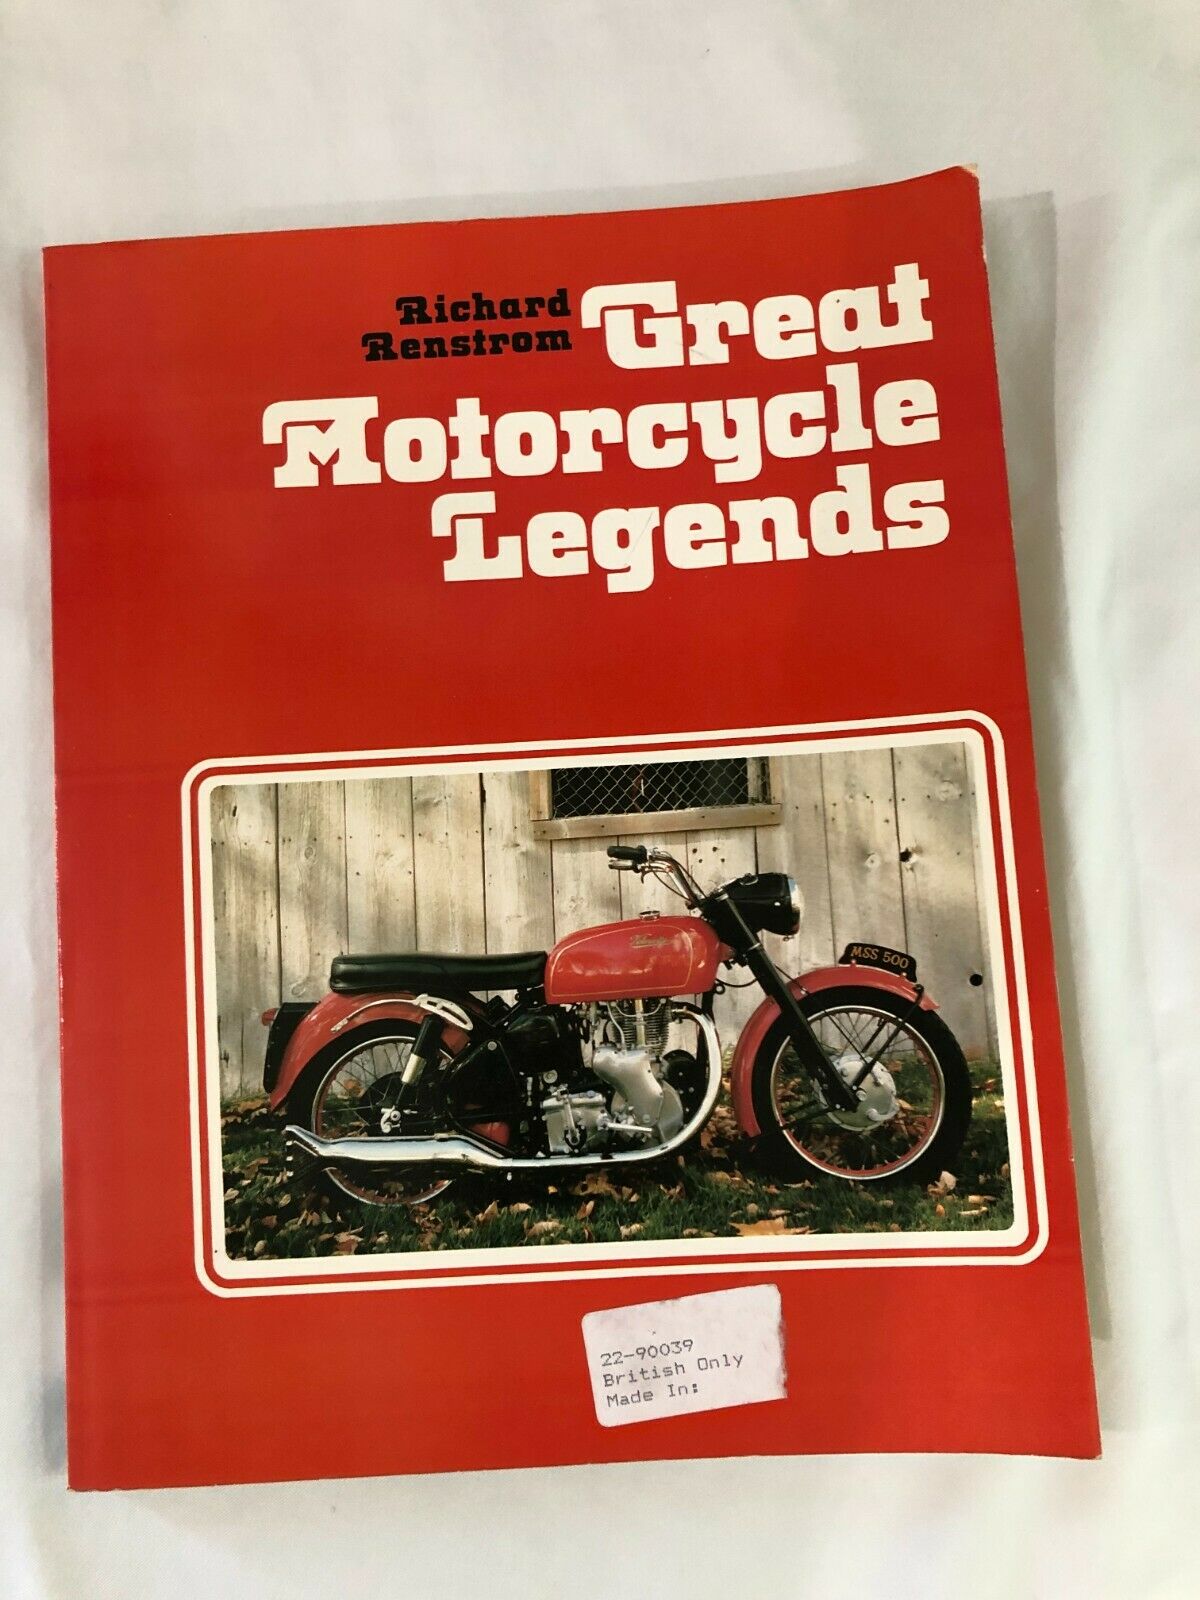 Great Motorcycle Legends By Richard Renstrom Bsa Bmw Honda Triumph Matchless Ajs